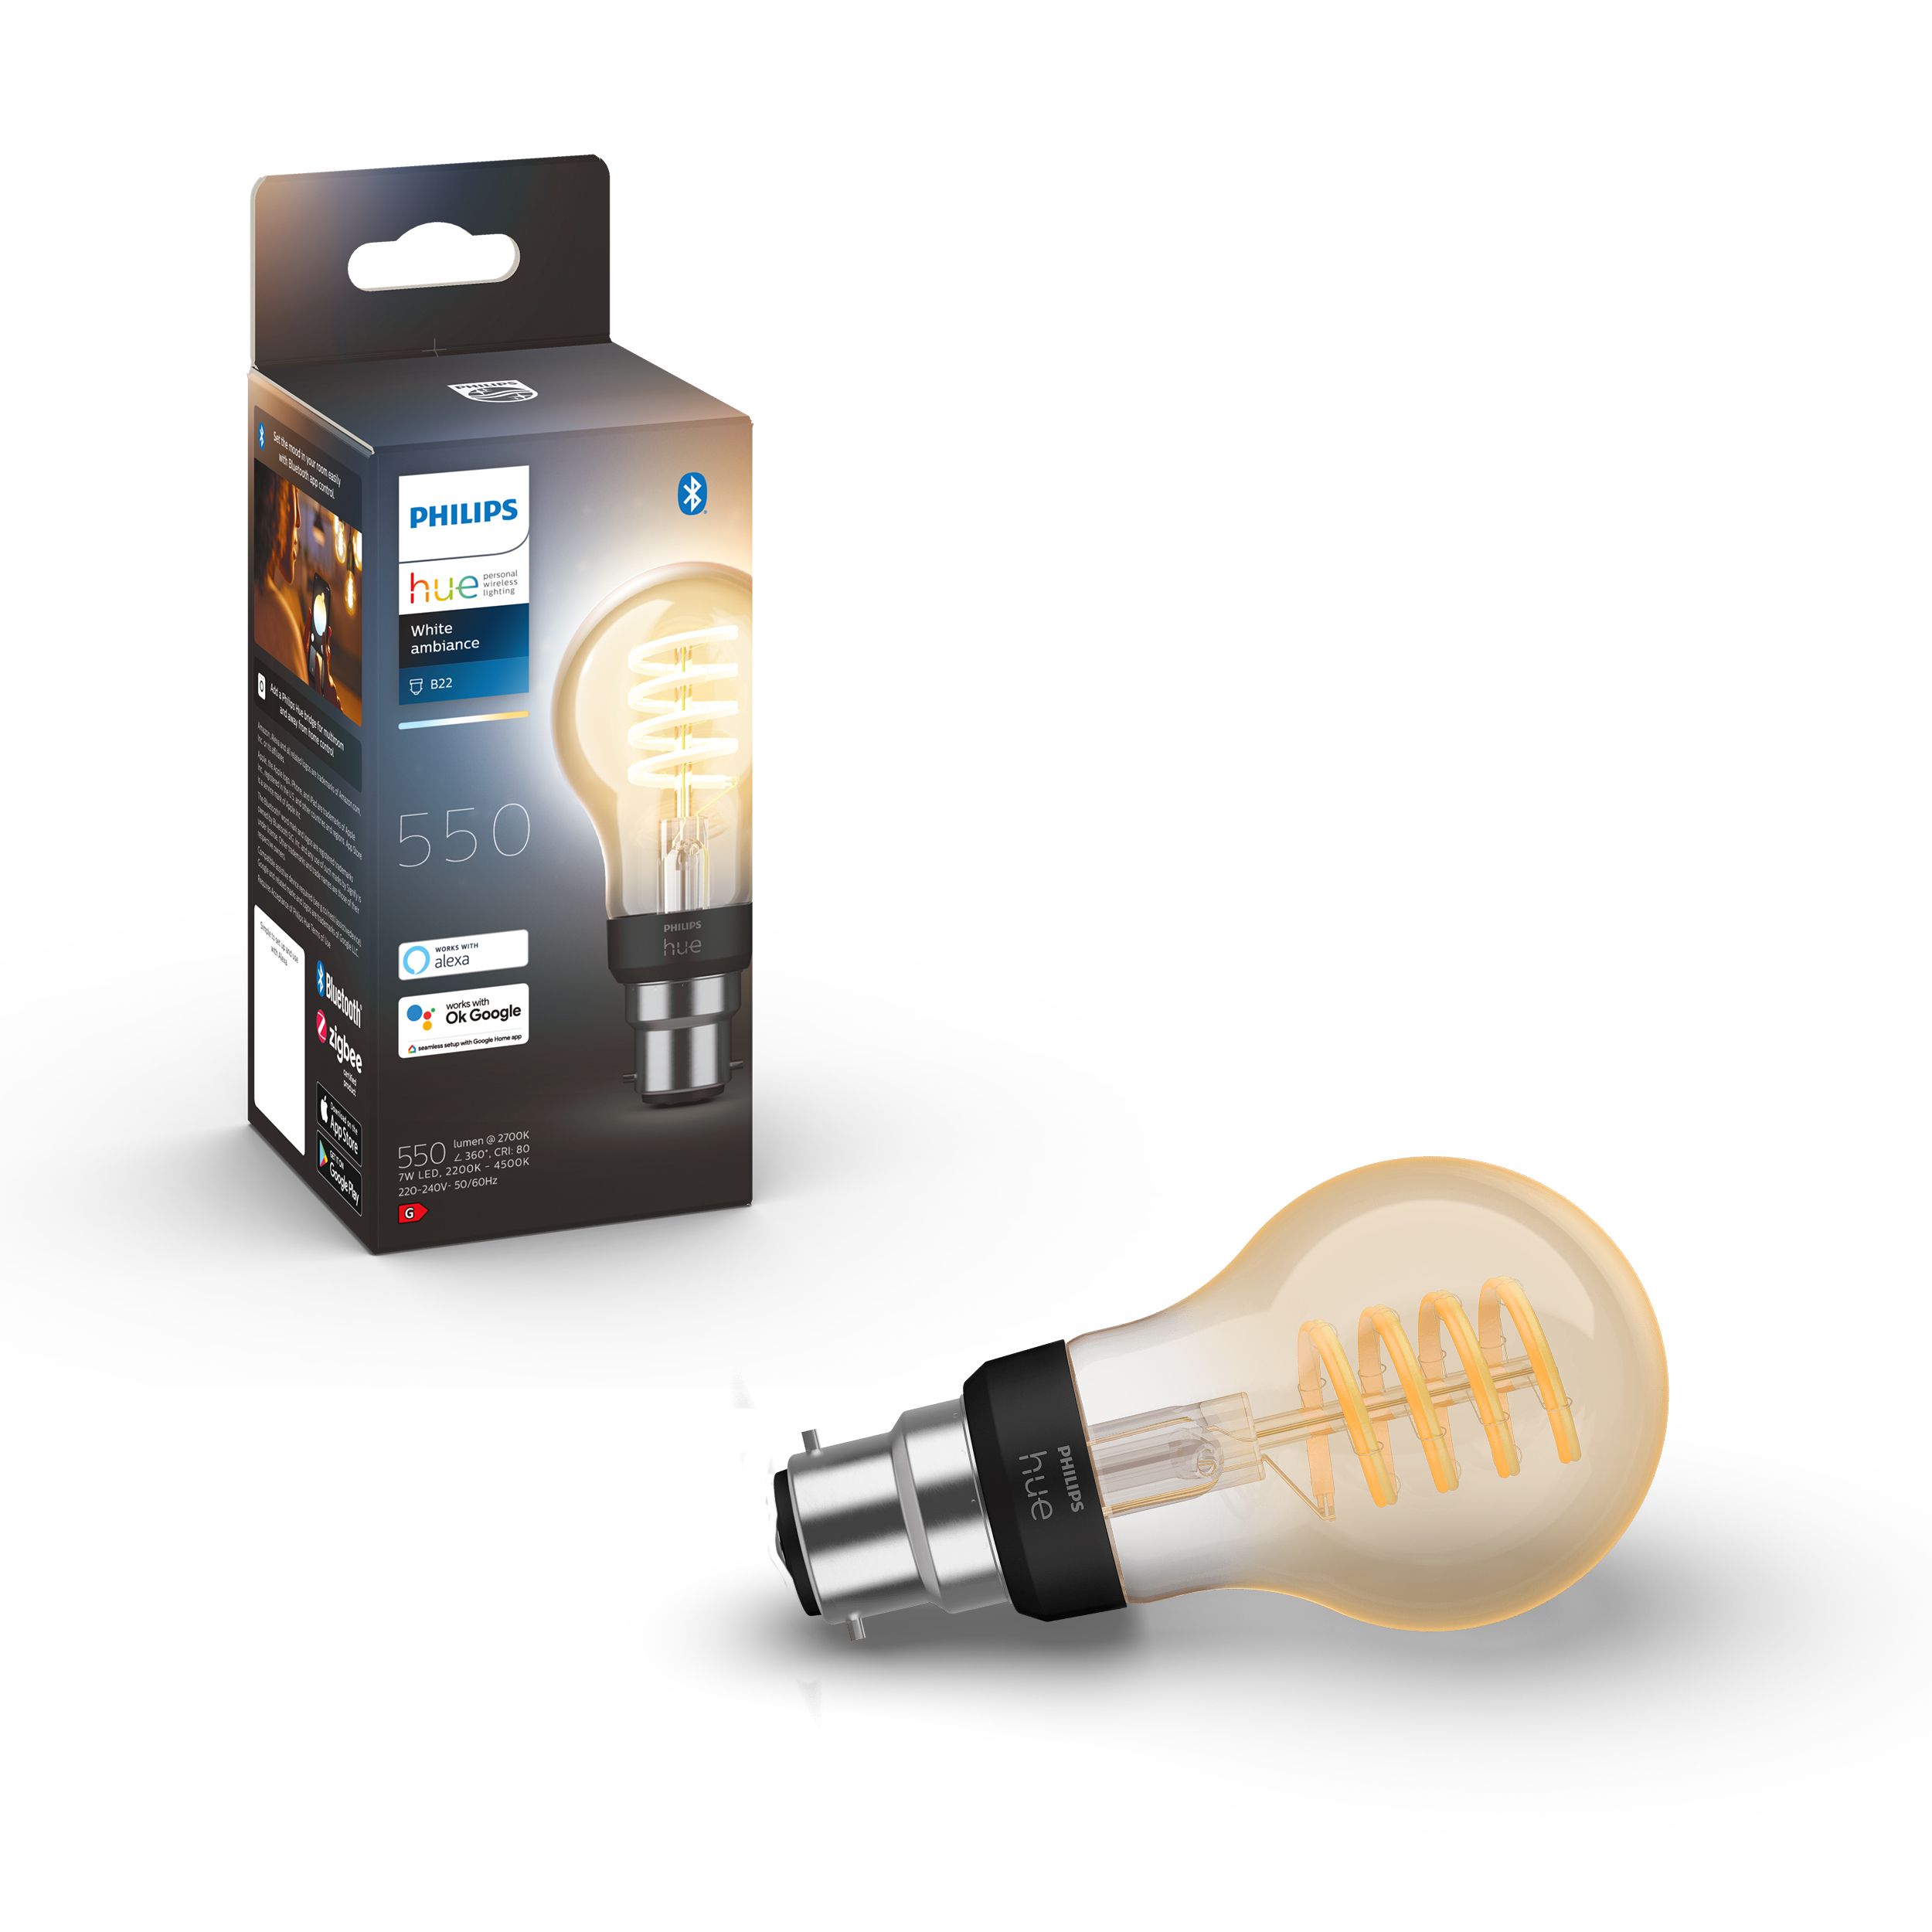 Philips Hue LED Cool white & warm white A60 Non-dimmable Light bulb